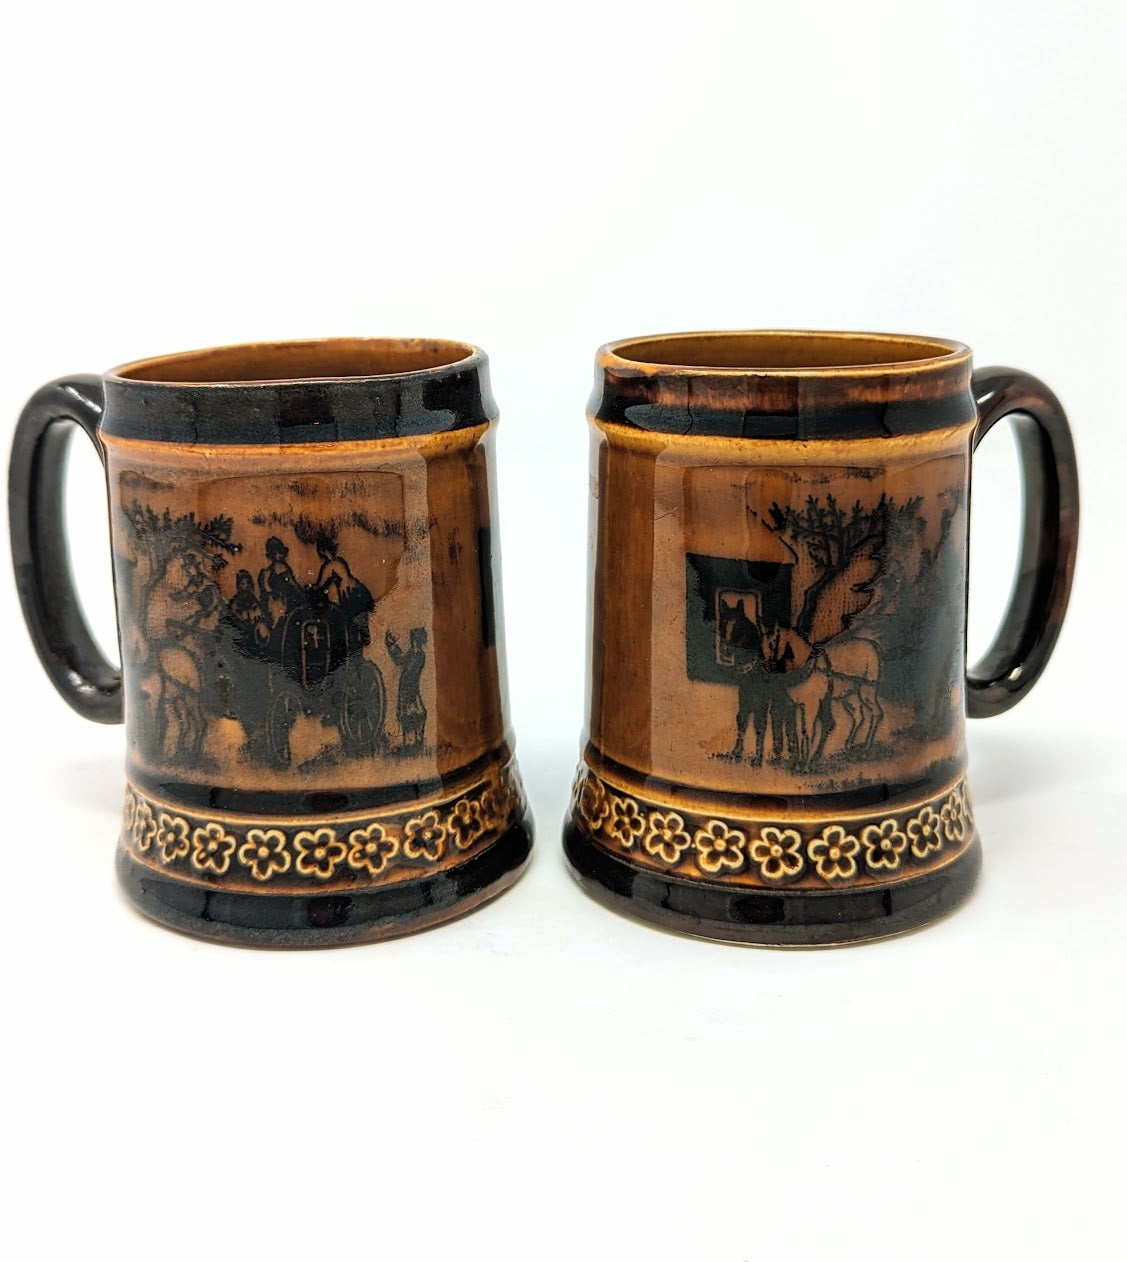 1940s Vintage Hand-Painted Ceramic Mugs (2) "Made in Occupied Japan"